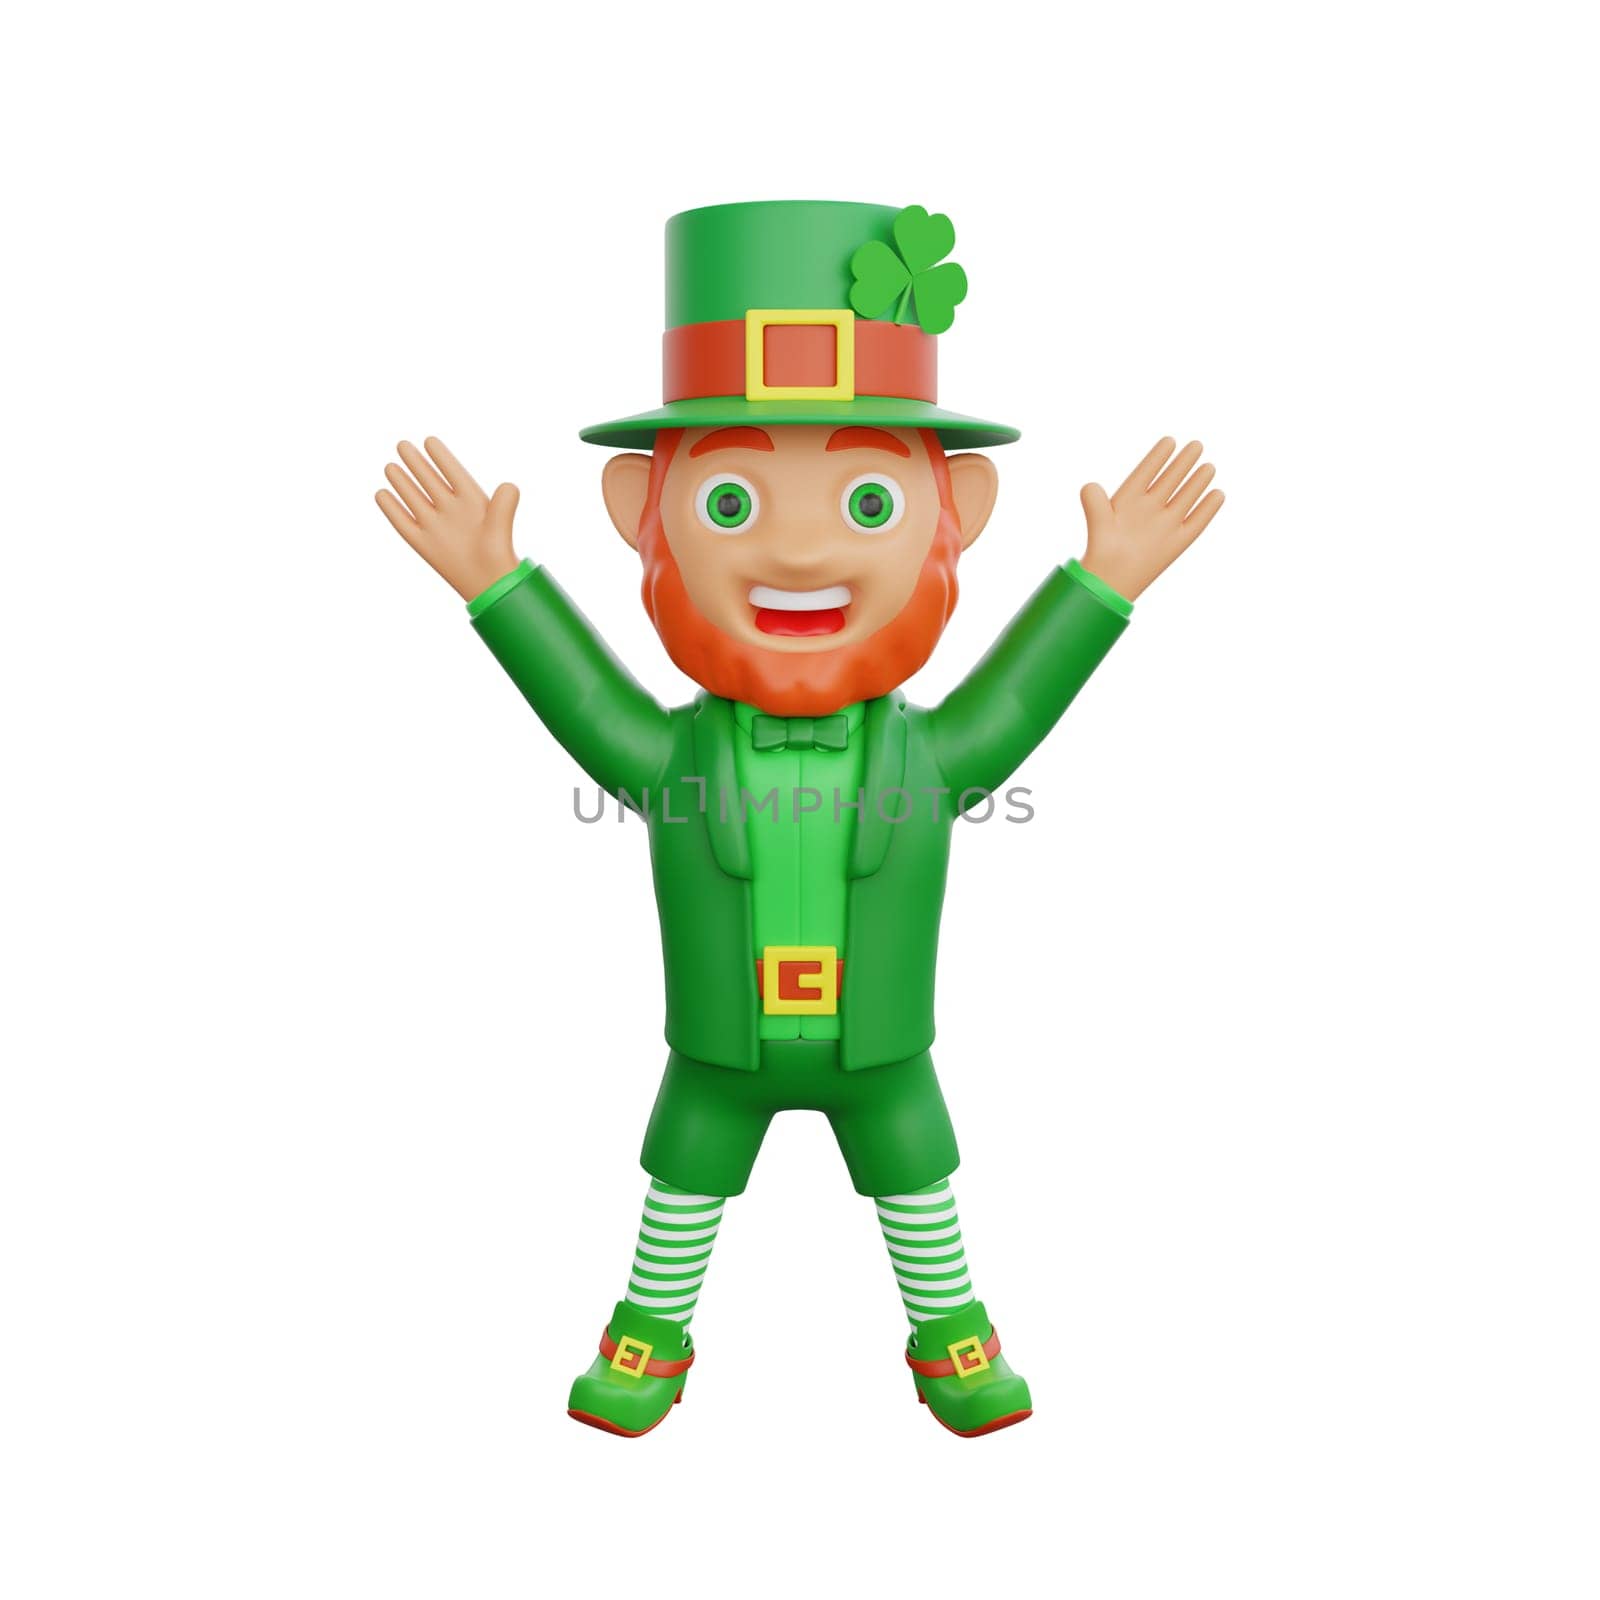 3D illustration of a cheerful leprechaun, leaping joyfully, celebrating St. Patrick’s Day, perfect for St. Patrick's Day themed projects